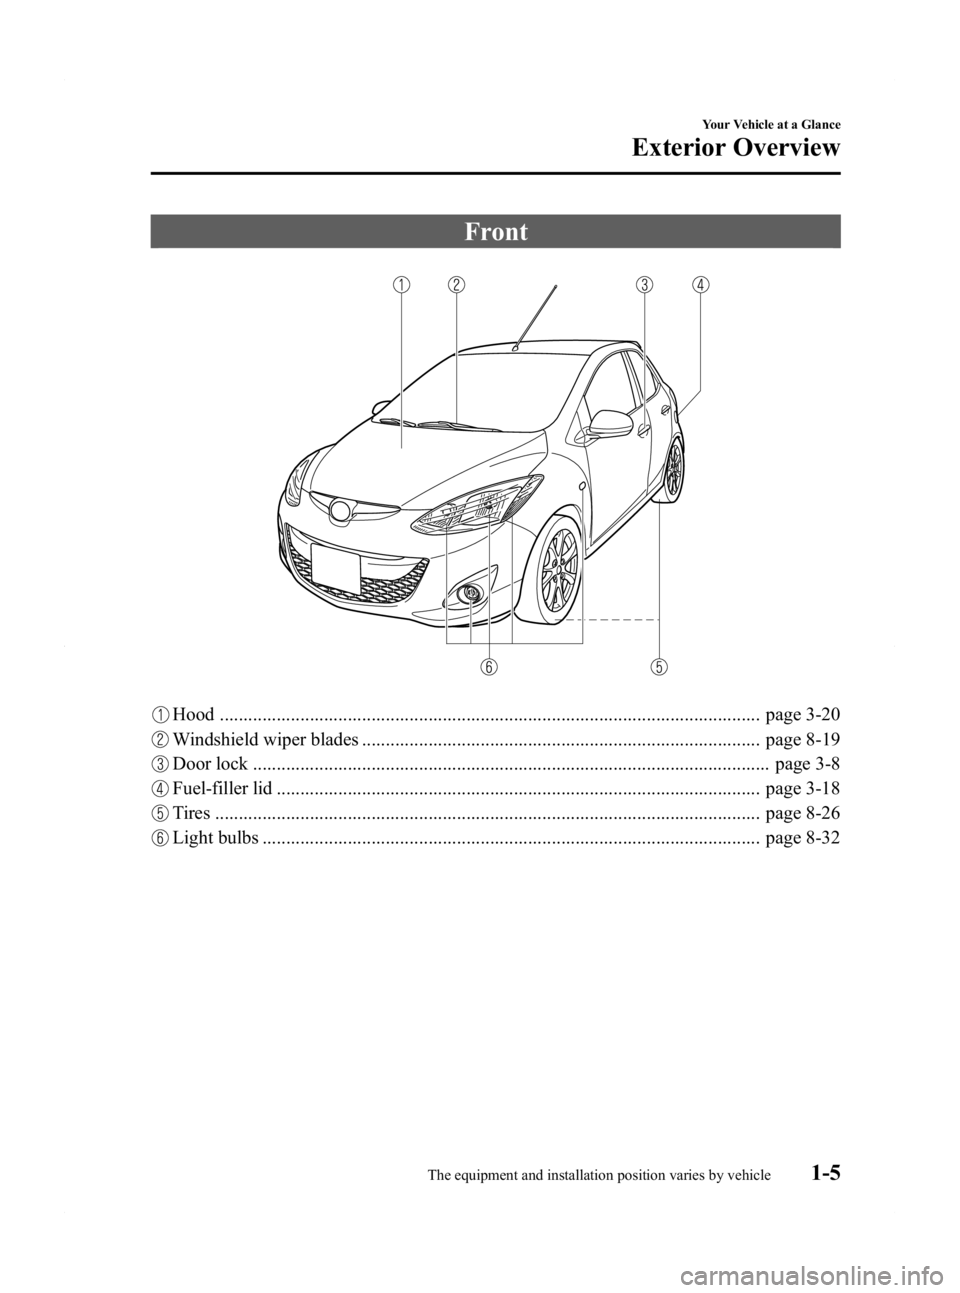 MAZDA MODEL 2 2011 User Guide Black plate (11,1)
Front
Hood .................................................................................................................. page 3-20
Windshield wiper blades .....................